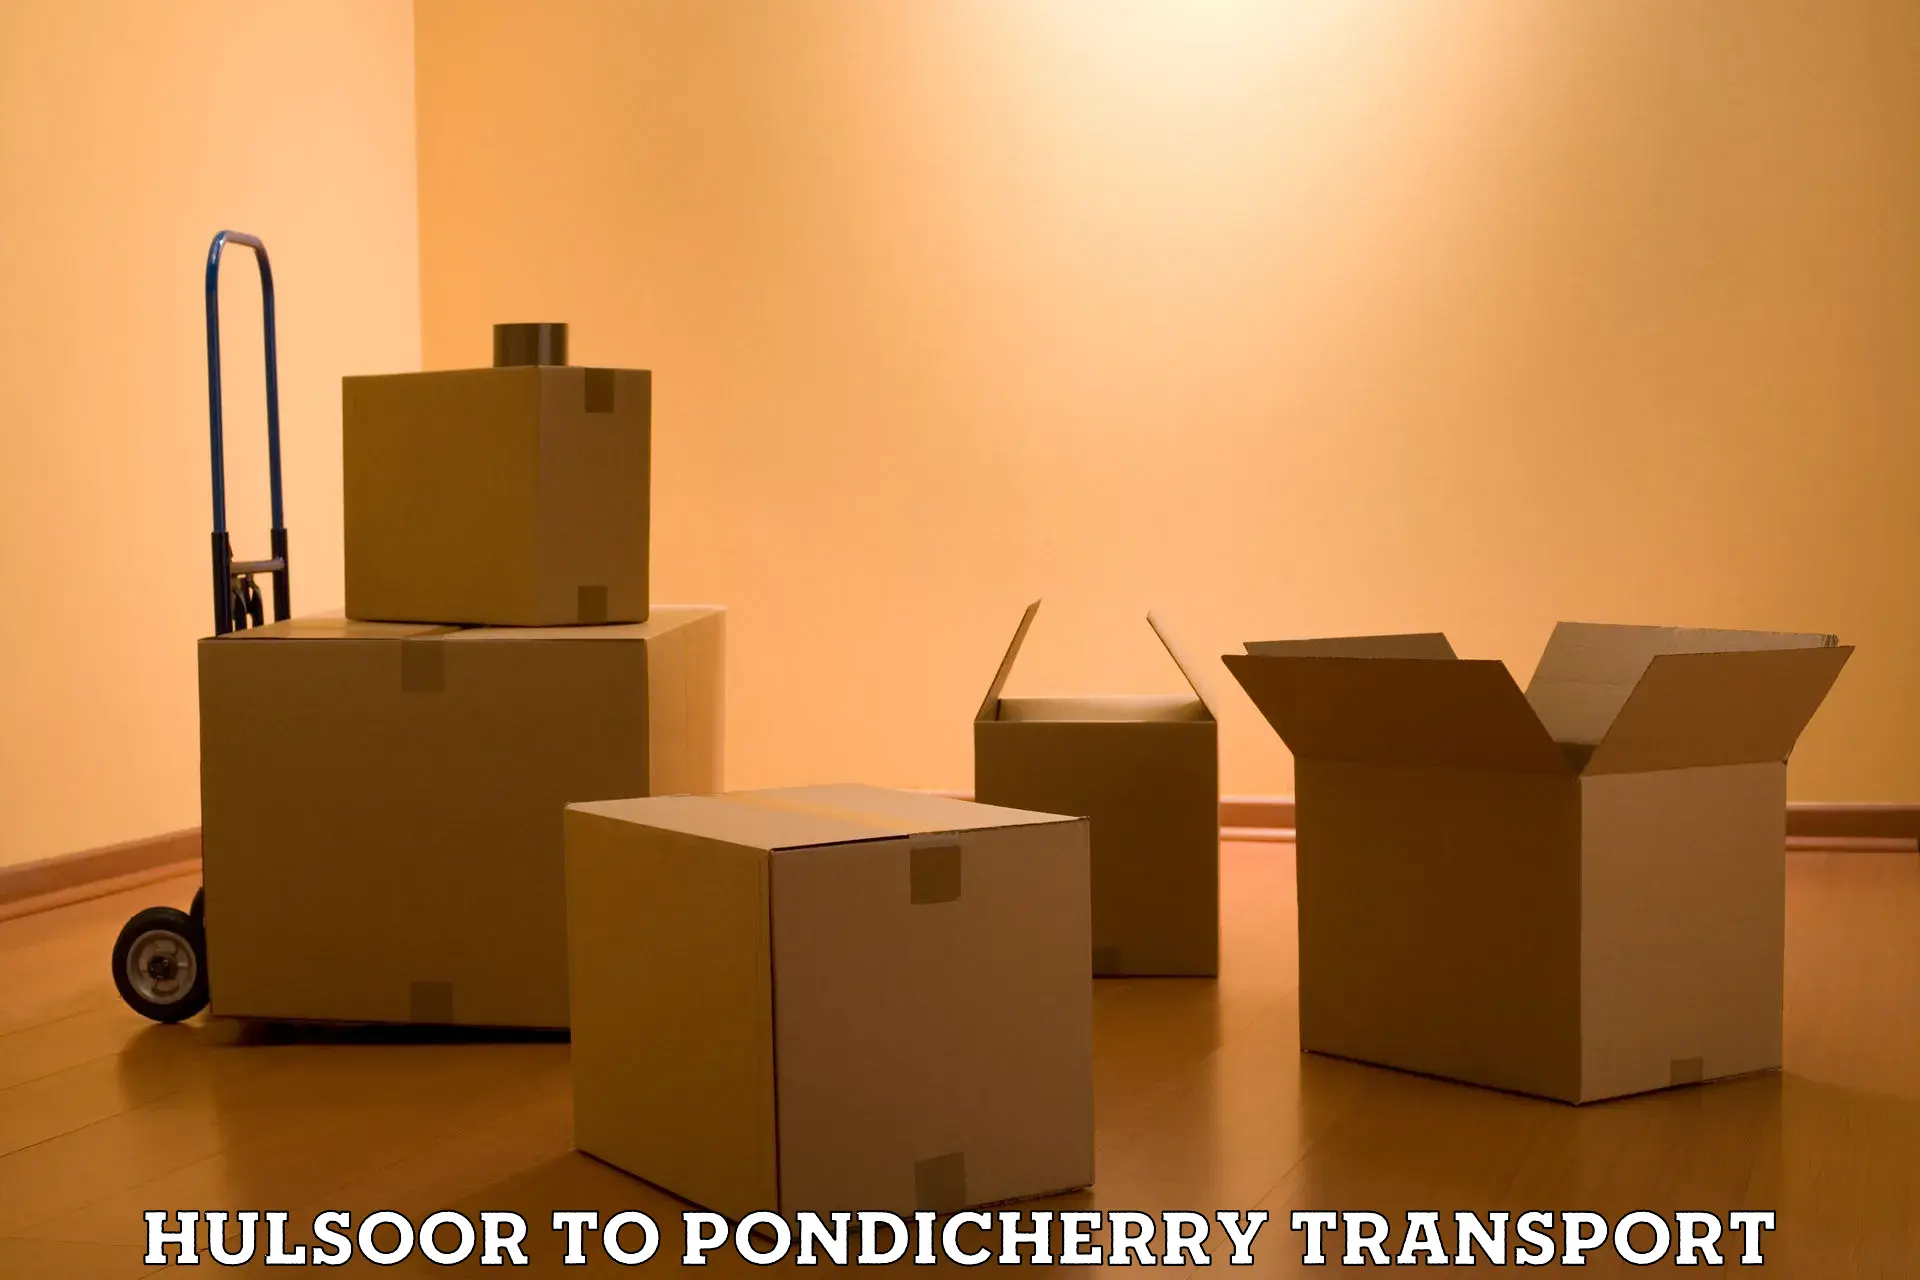 Container transport service Hulsoor to Pondicherry